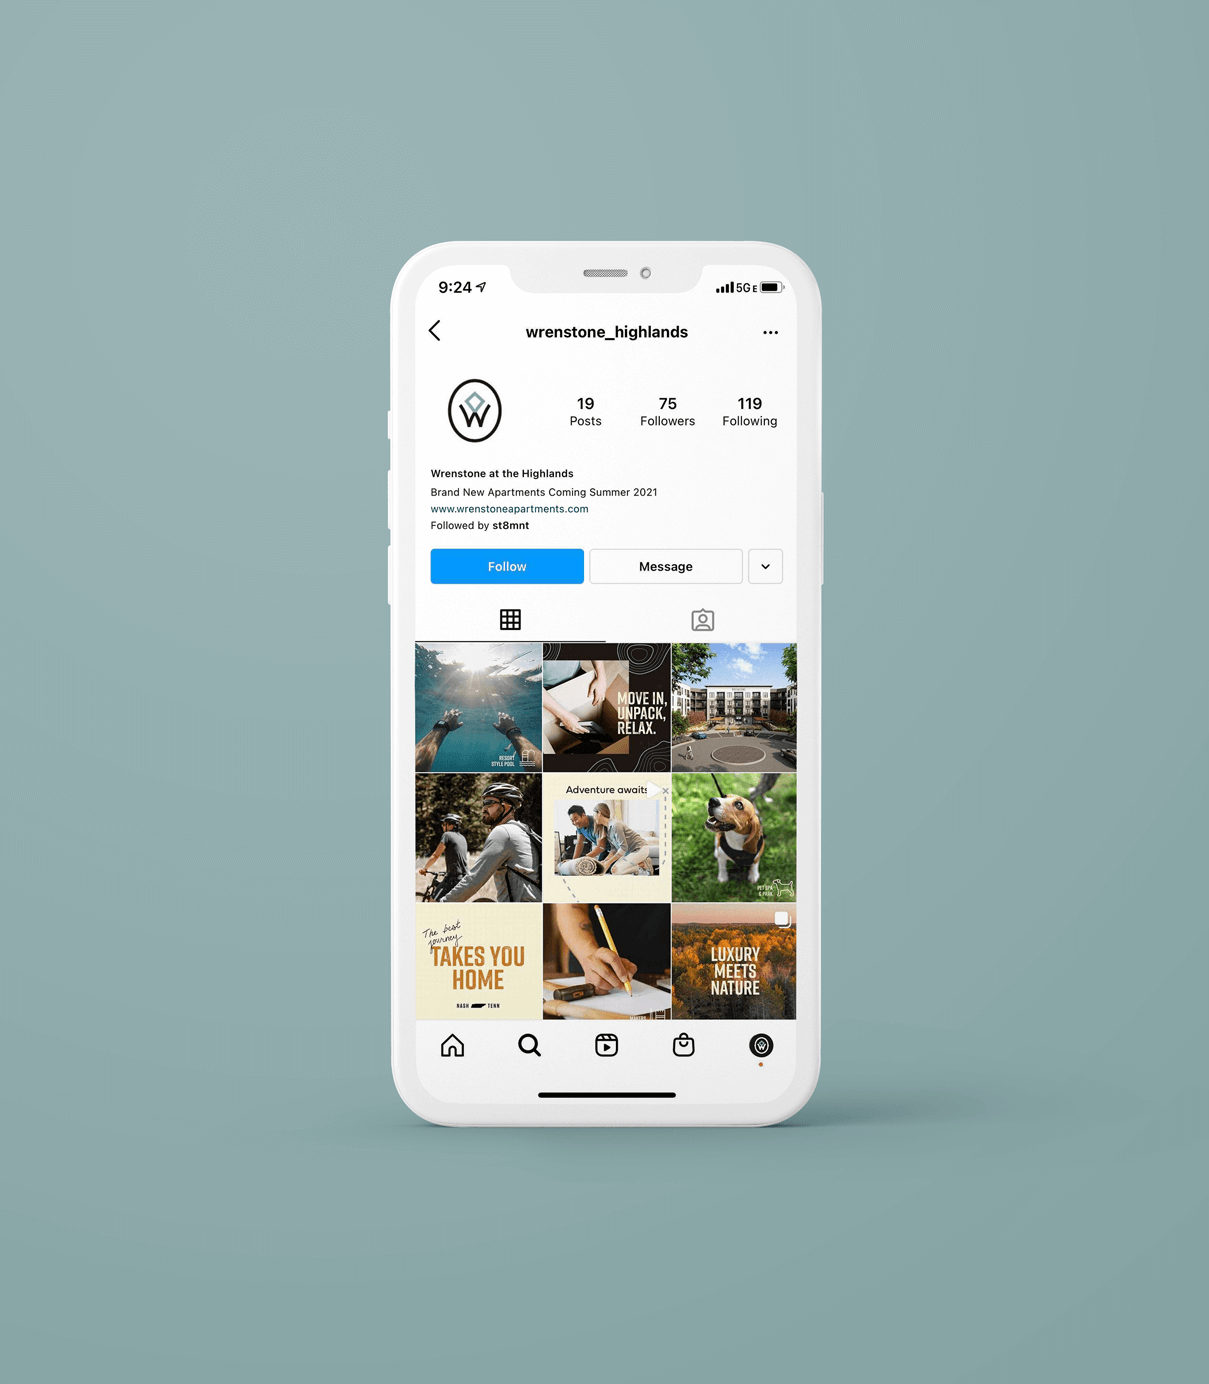 Wrenstone social media mock up on white iphone Instagram page on teal background